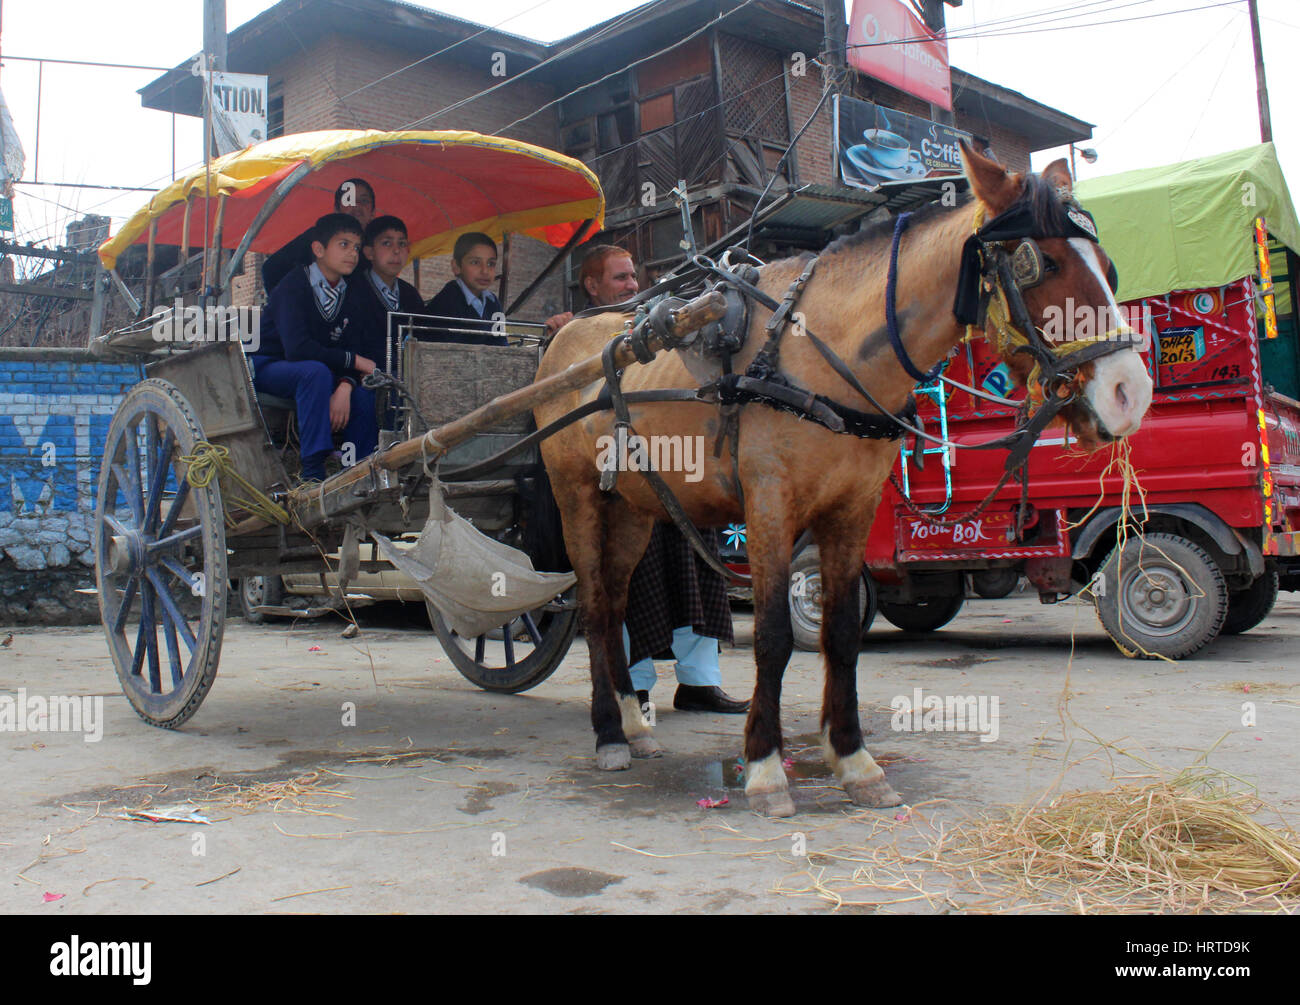 A Tonga or tanga is a light carriage or curricle drawn by horse used for  transportation in Indian occupied Kashmir. They have a canopy over the  carriage with a single pair of